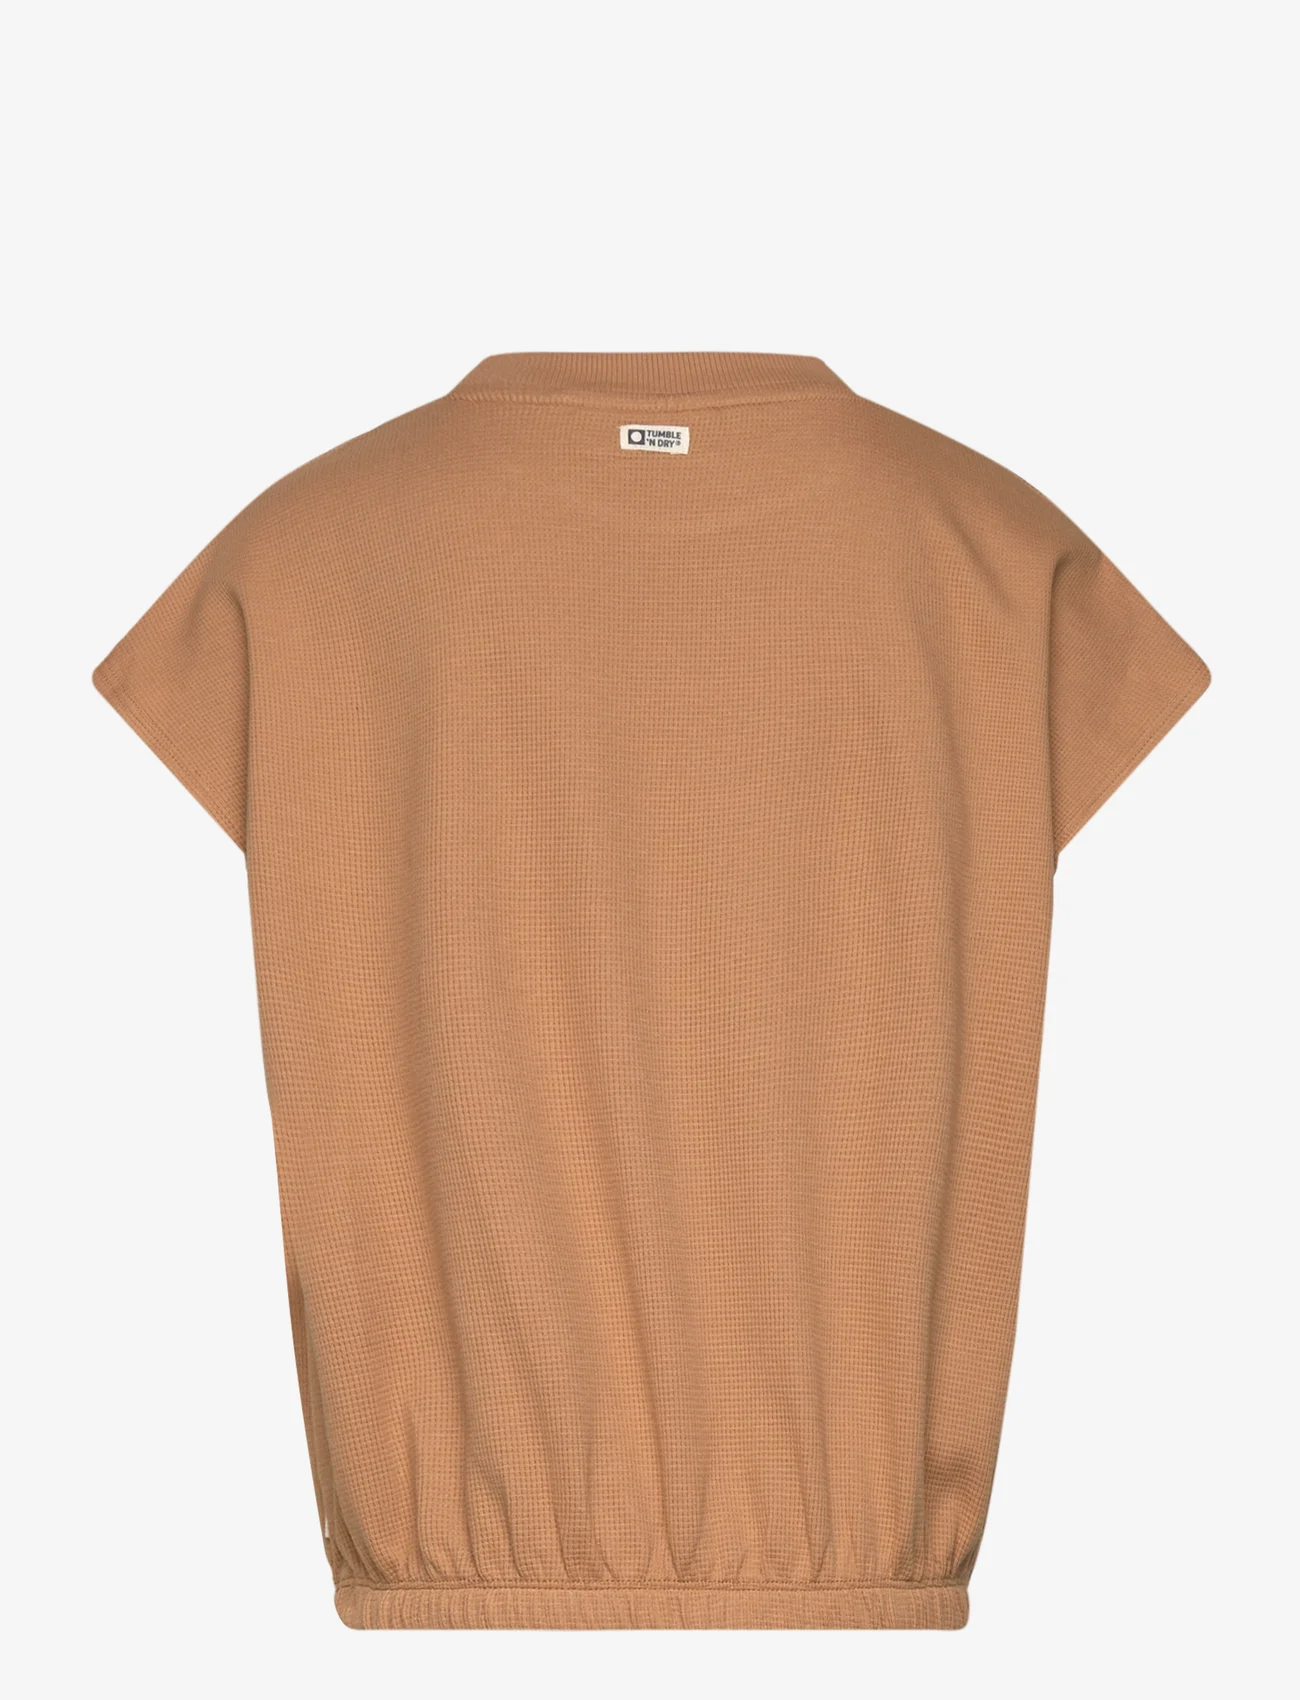 TUMBLE 'N DRY - Beverly Hills - topit - brown - 1